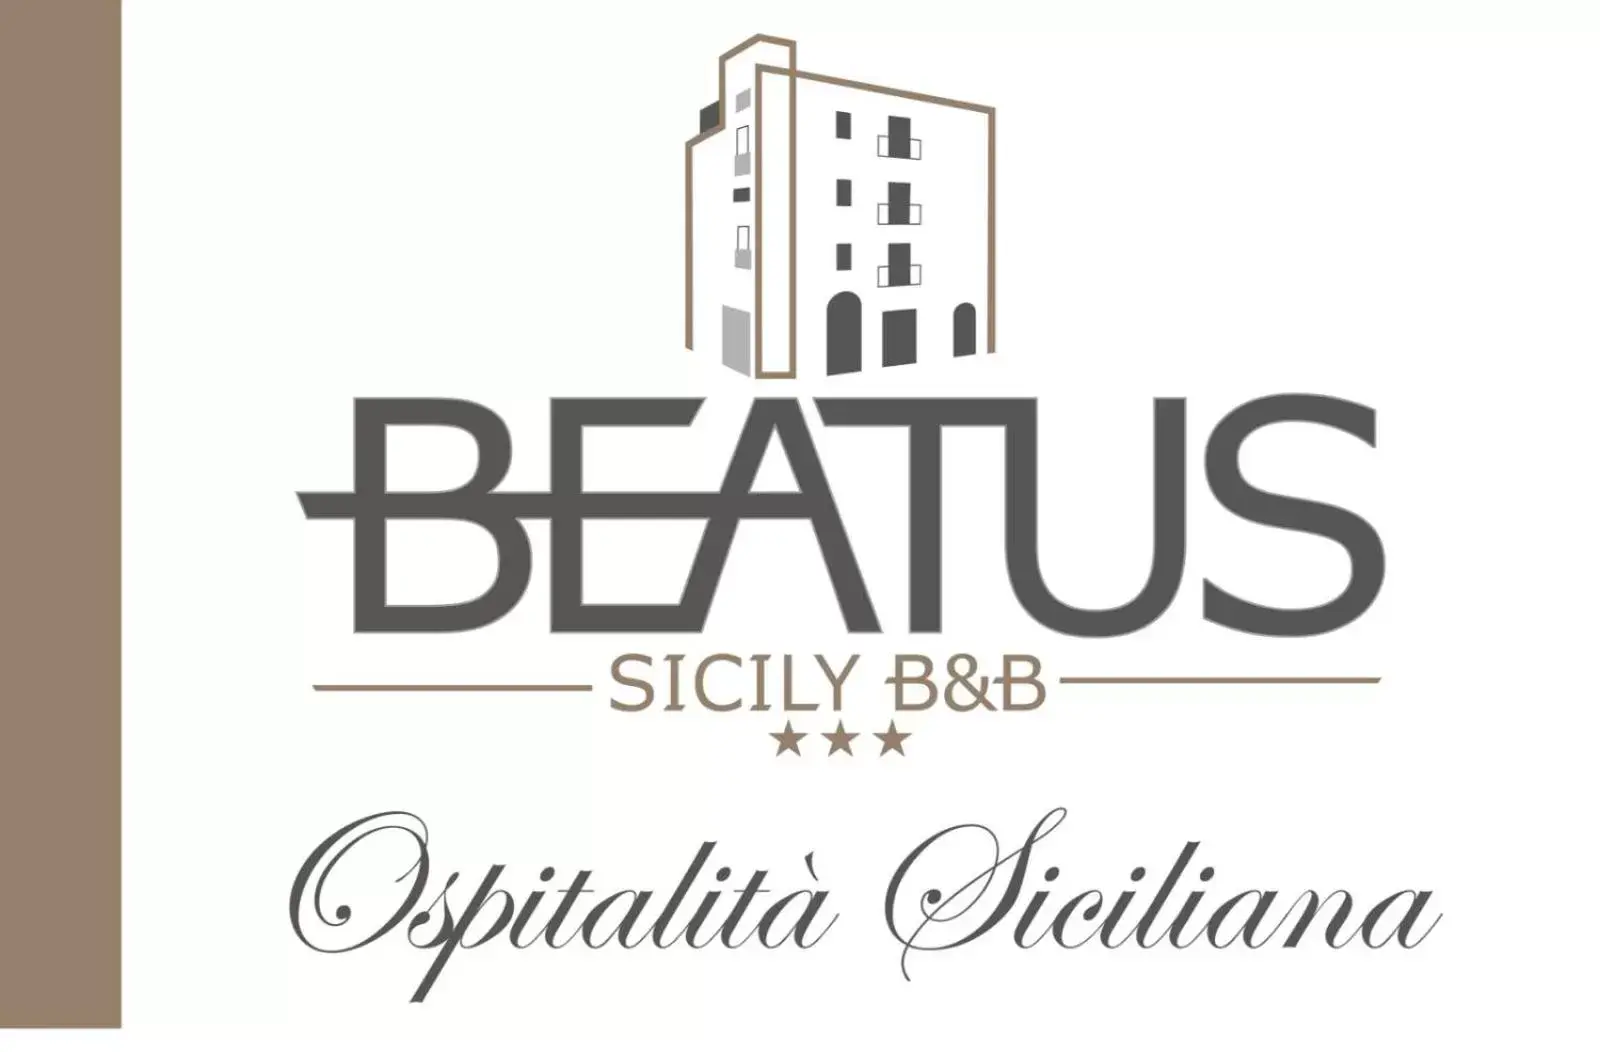 Property logo or sign, Property Logo/Sign in Beatus Sicily B&B